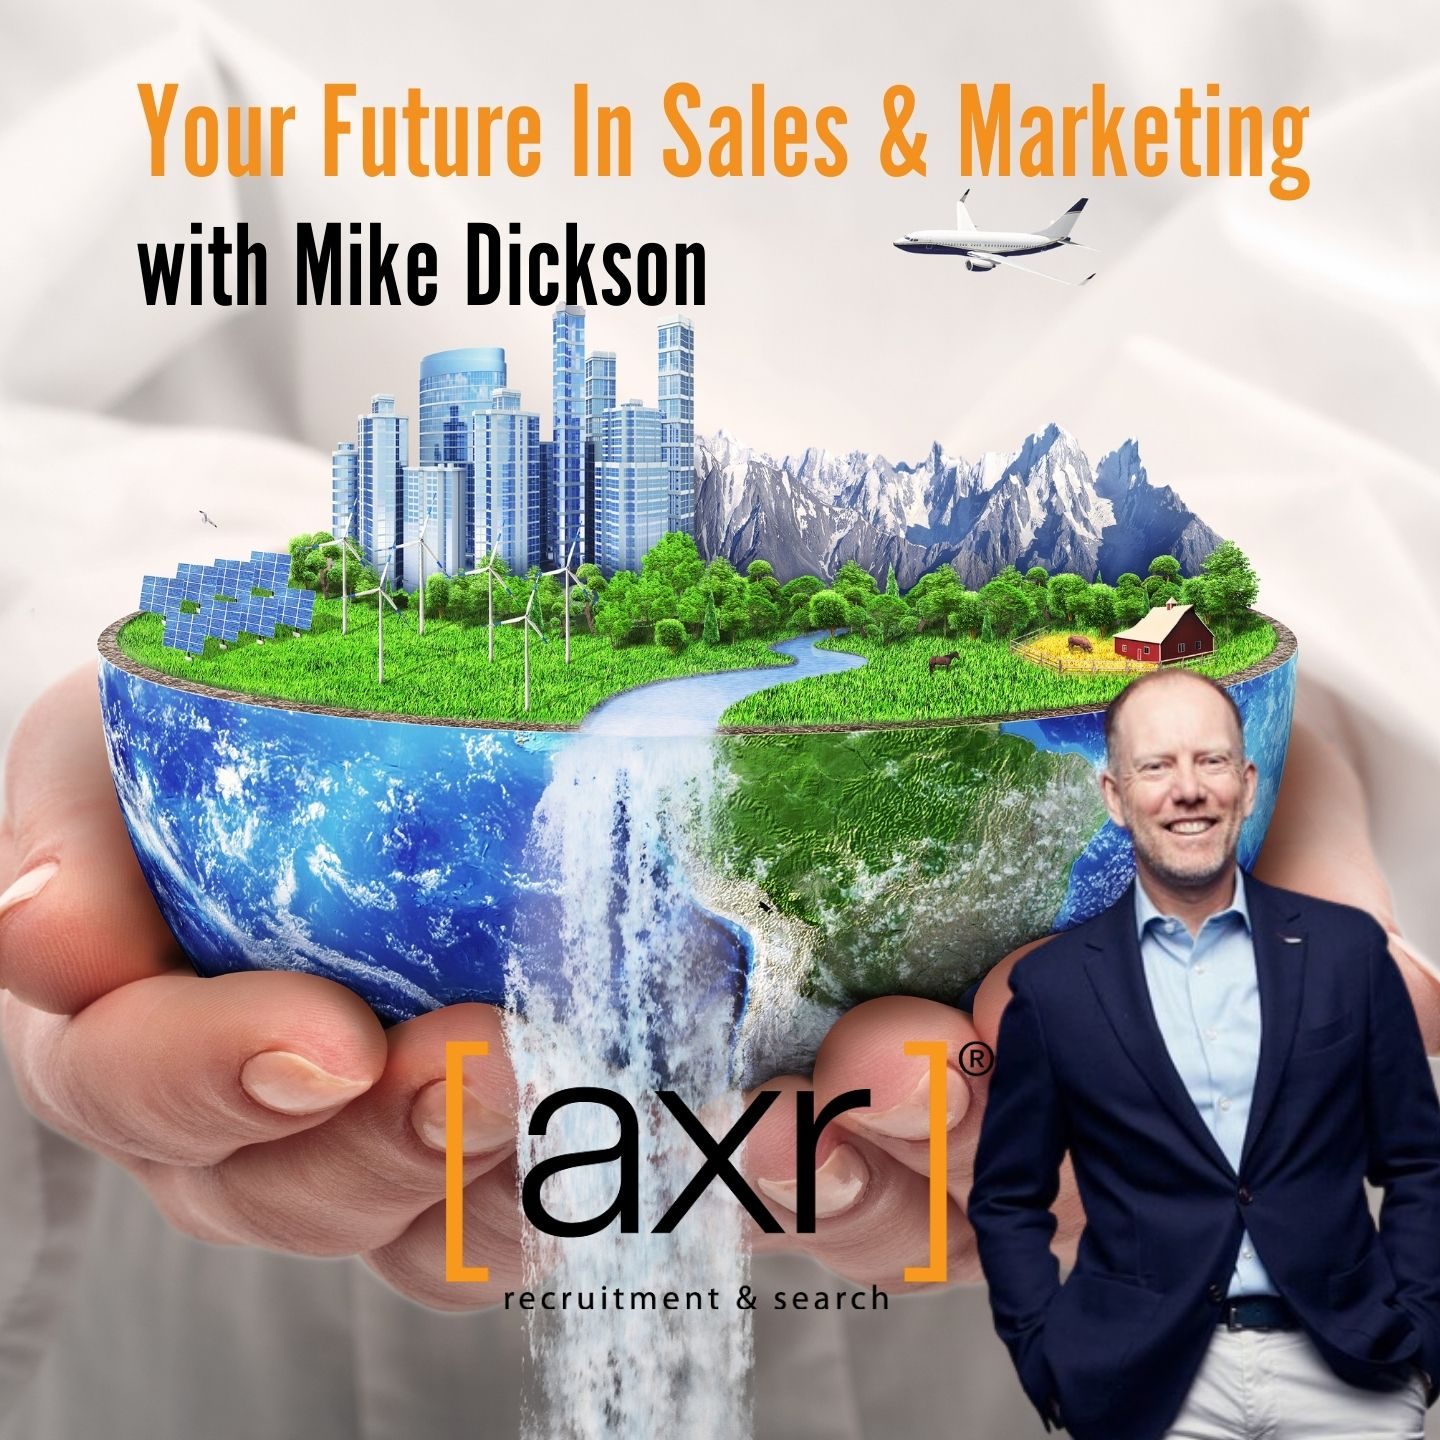 Your Future In Sales & Marketing with Mike Dickson-sales & Marketing recruitment Director